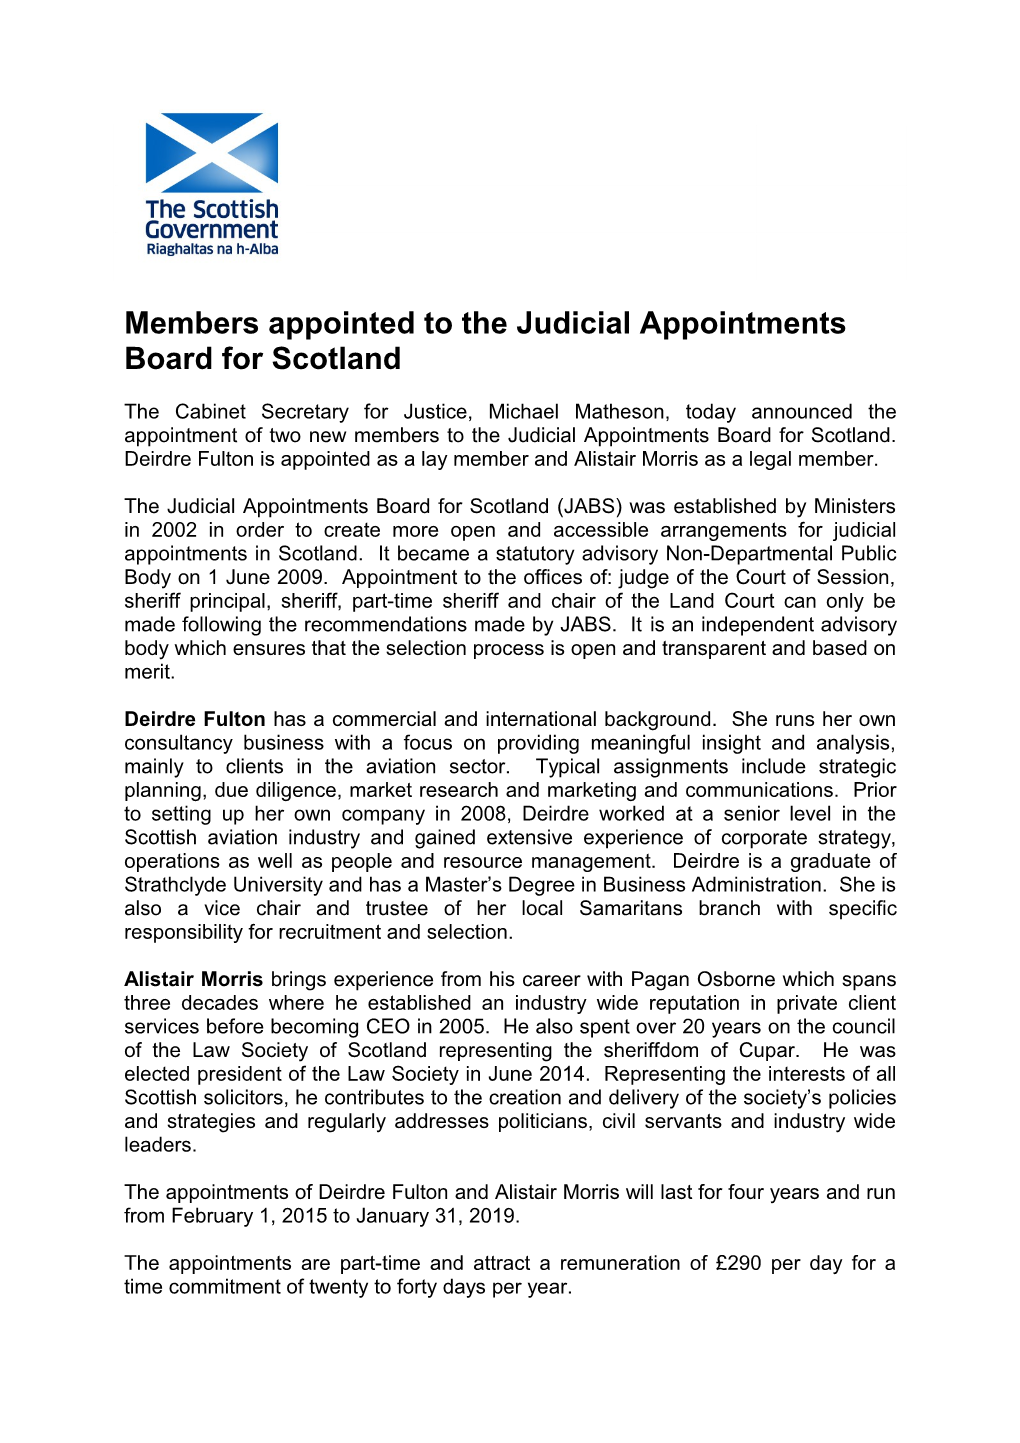 Members Appointed to the Judicial Appointments Board for Scotland